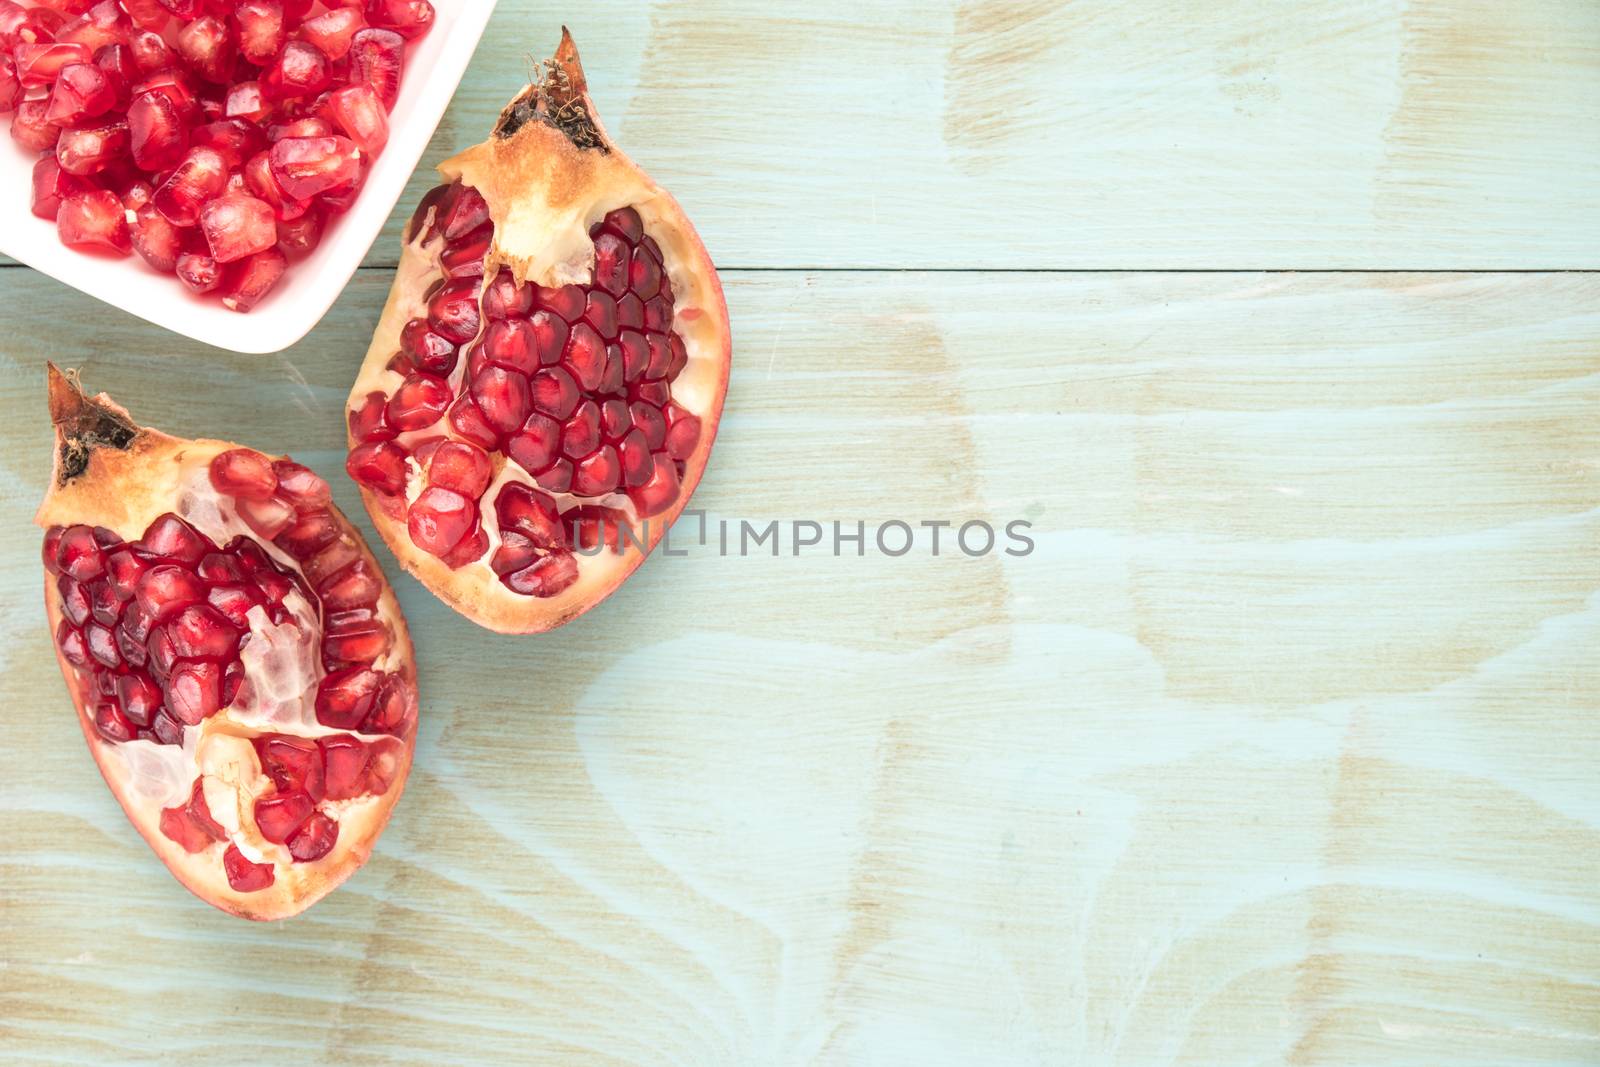 Pomegranates over grunge wooden background by AnaMarques